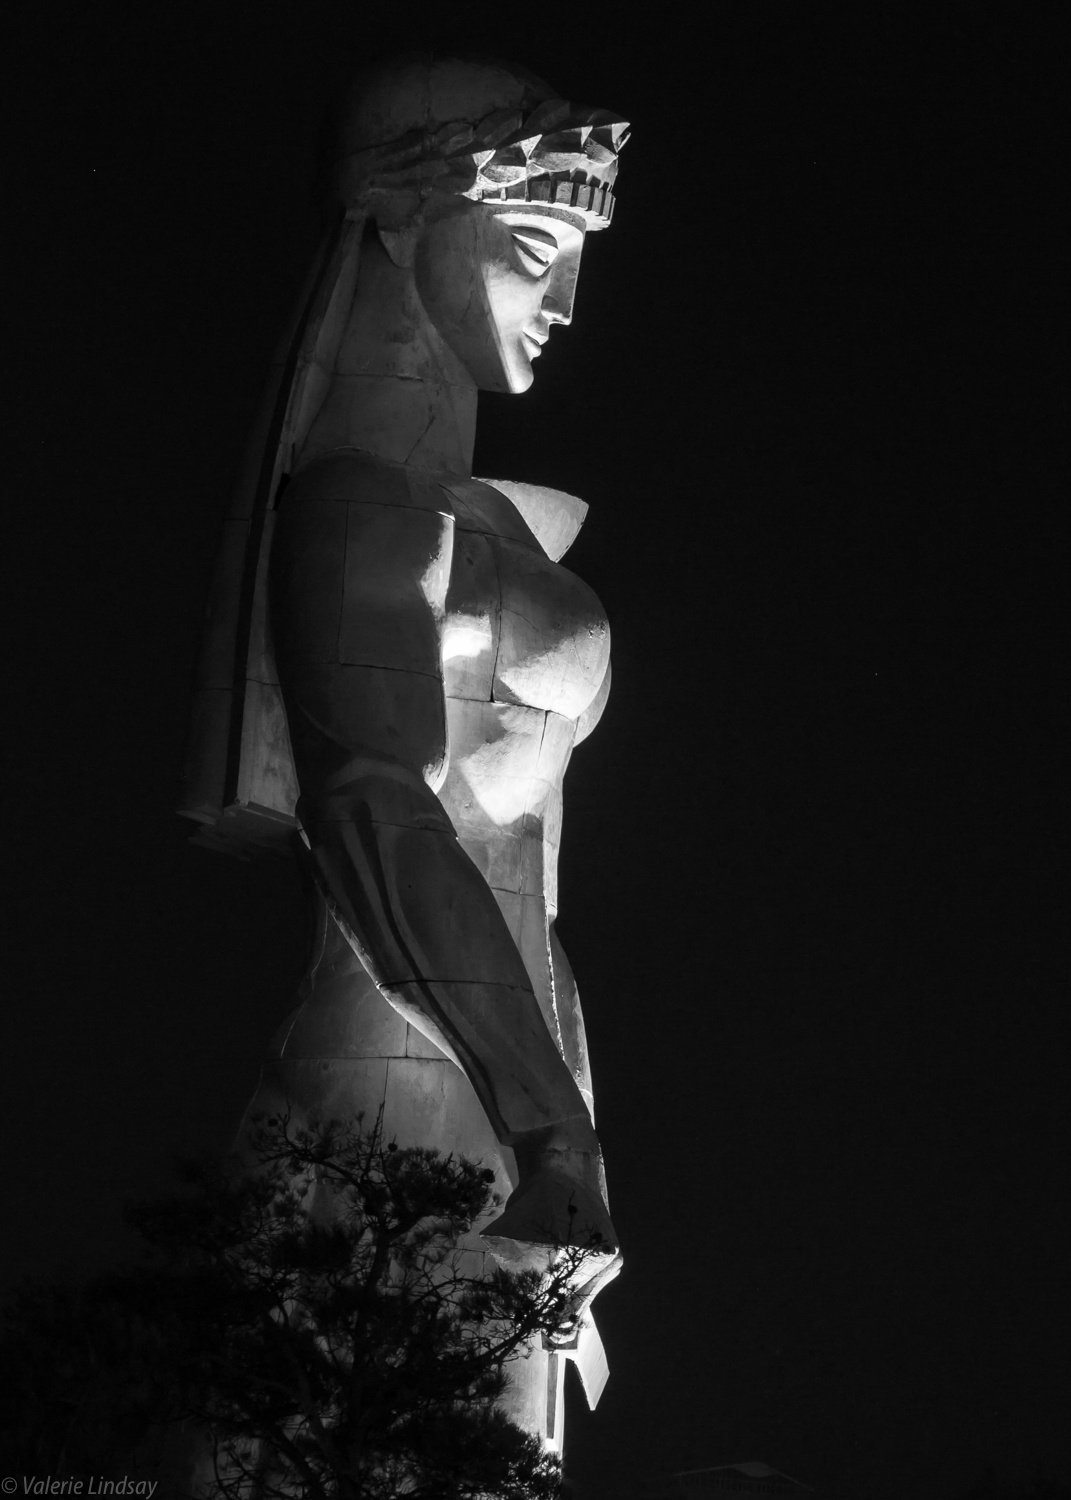 Statue lit up at night